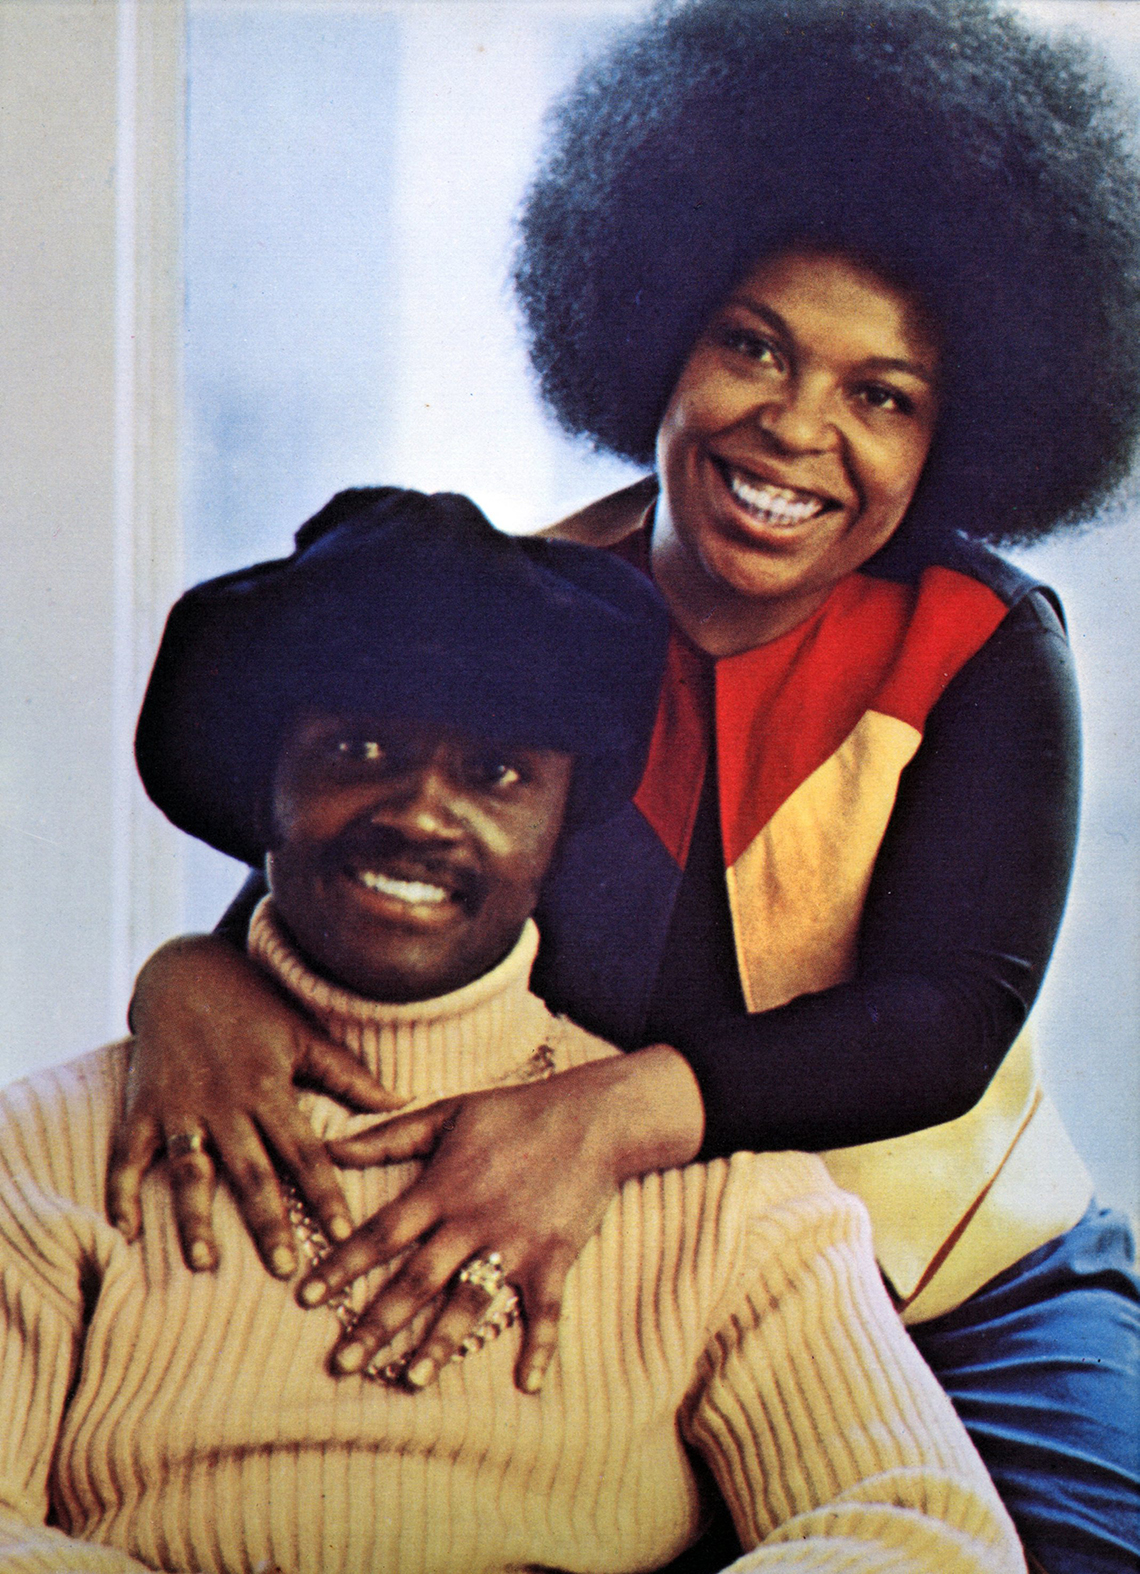 Roberta Flack and Donny Hathaway sitting together posing for a portrait